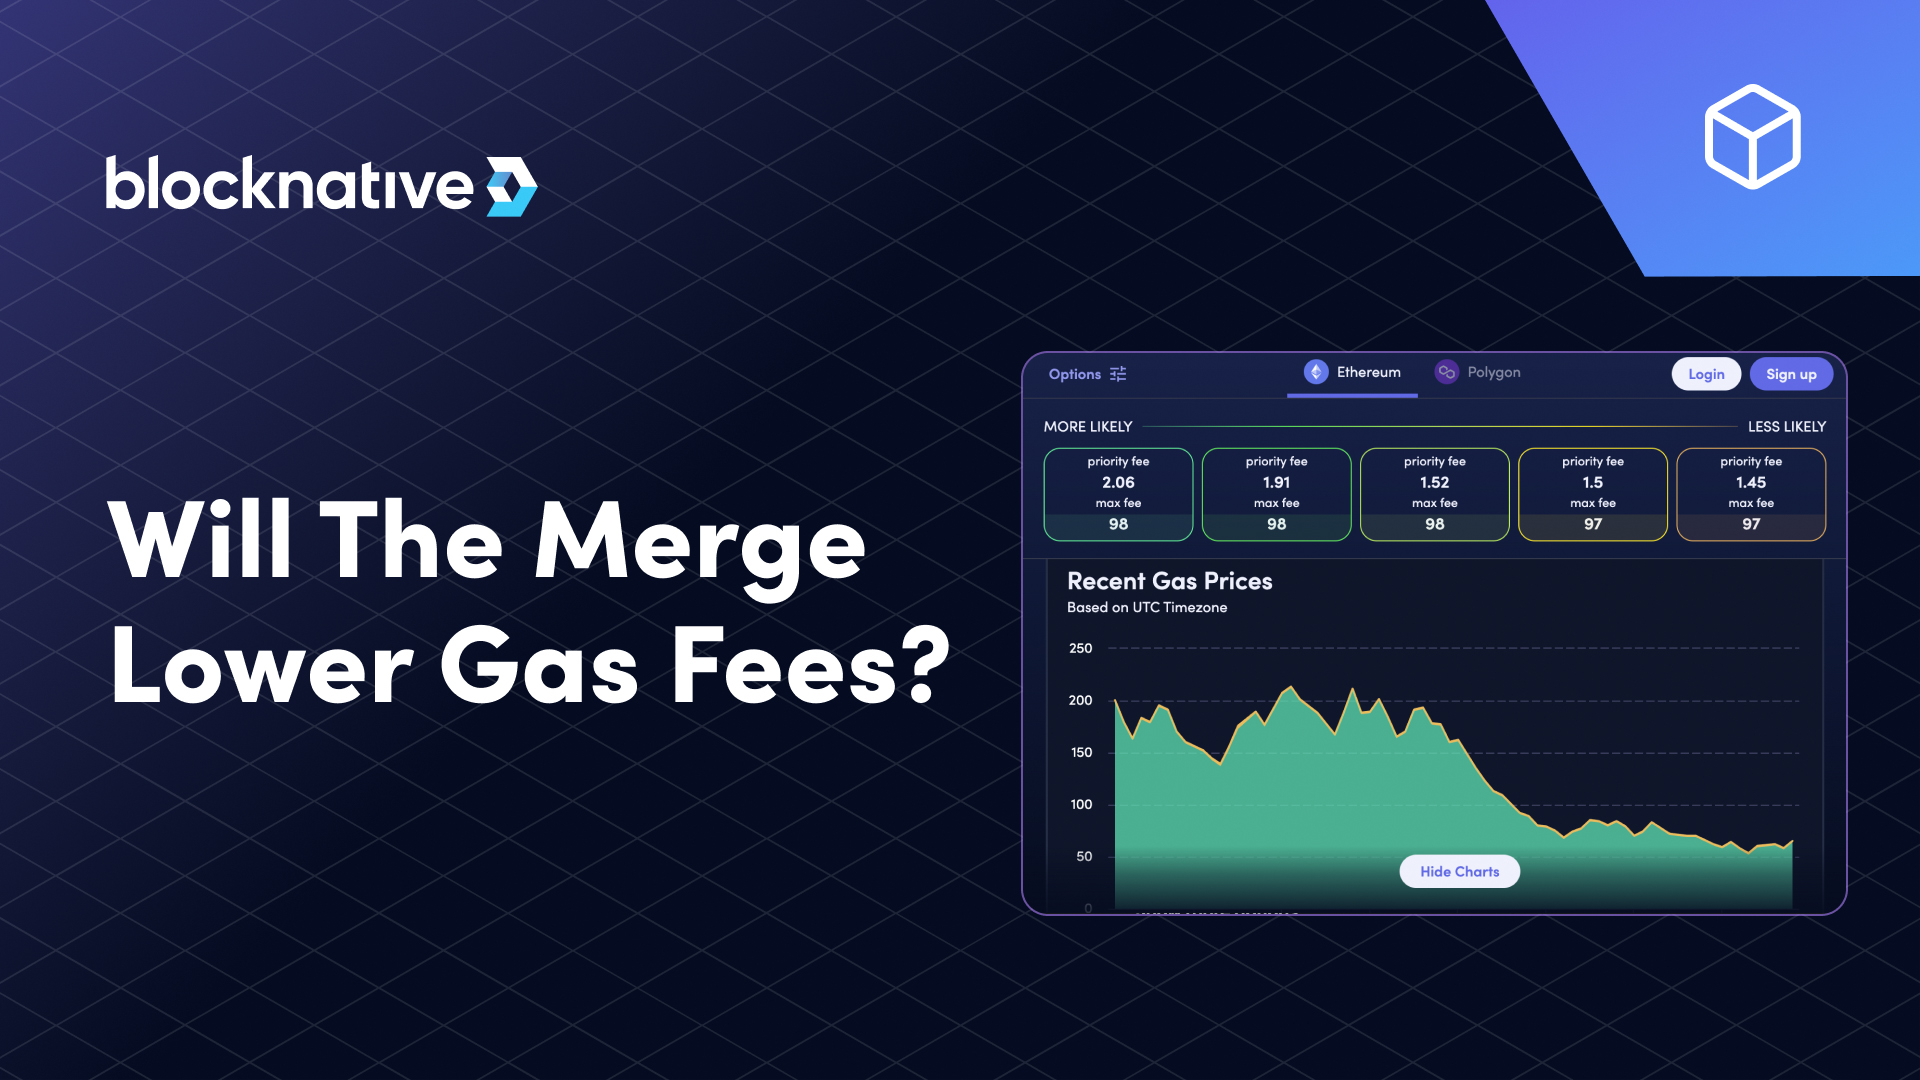 will-the-merge-lower-gas-fees?